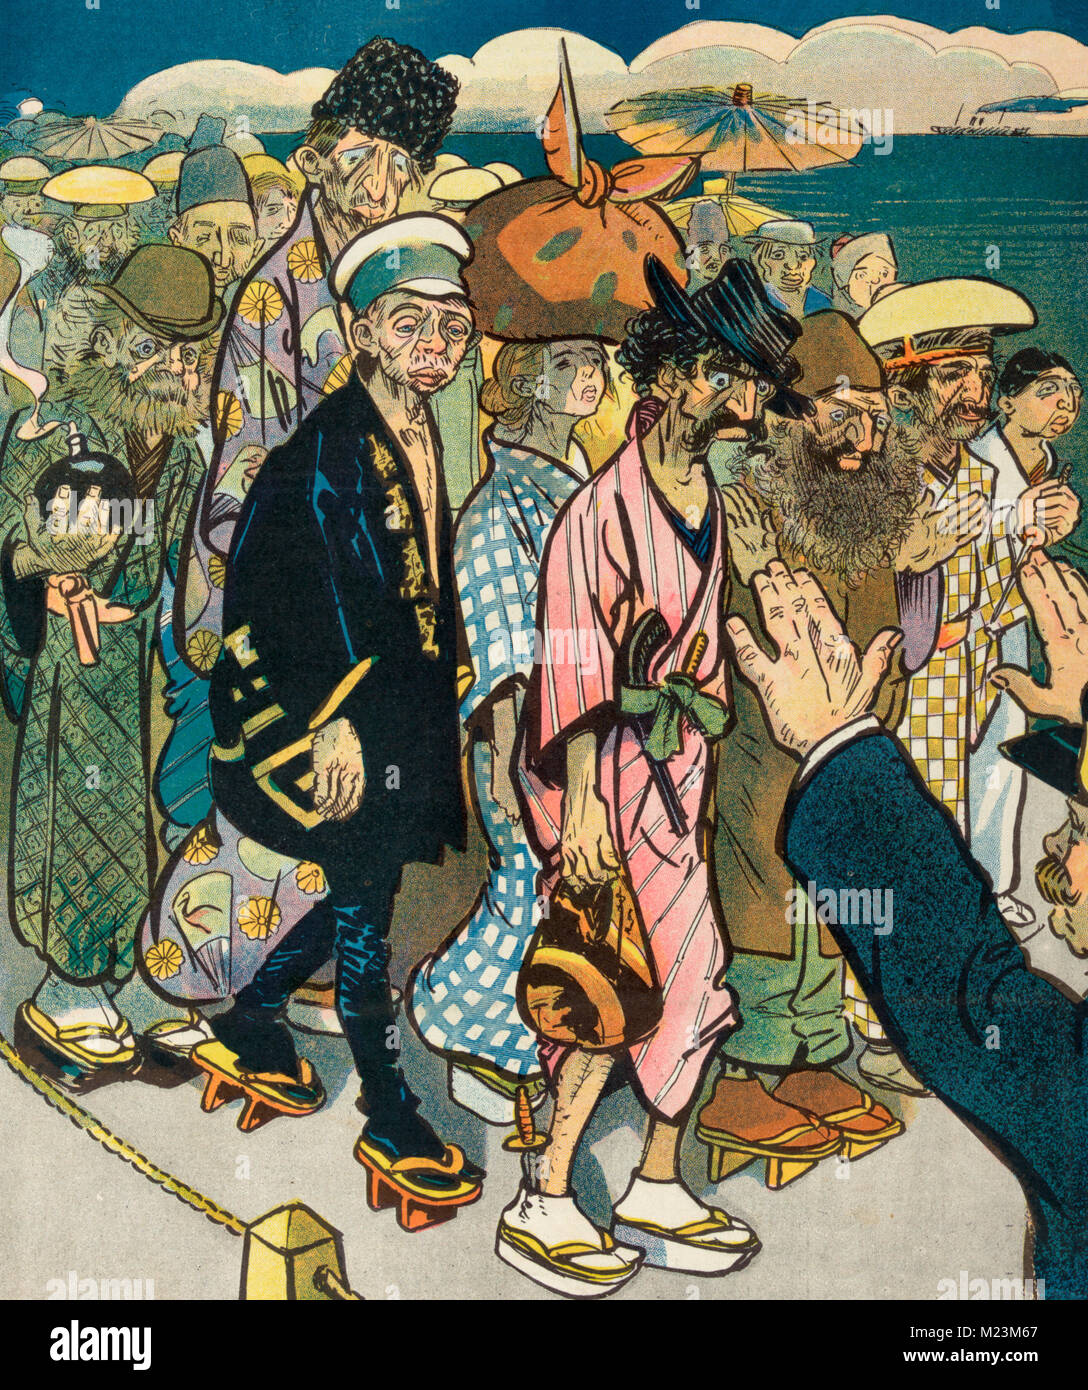 As to Japanese exclusion - Illustration shows a group of ragged anarchists and others dressed in kimonos, pretending to be Japanese immigrants; they are stopped at the border. Political Cartoon, 1907 Stock Photo